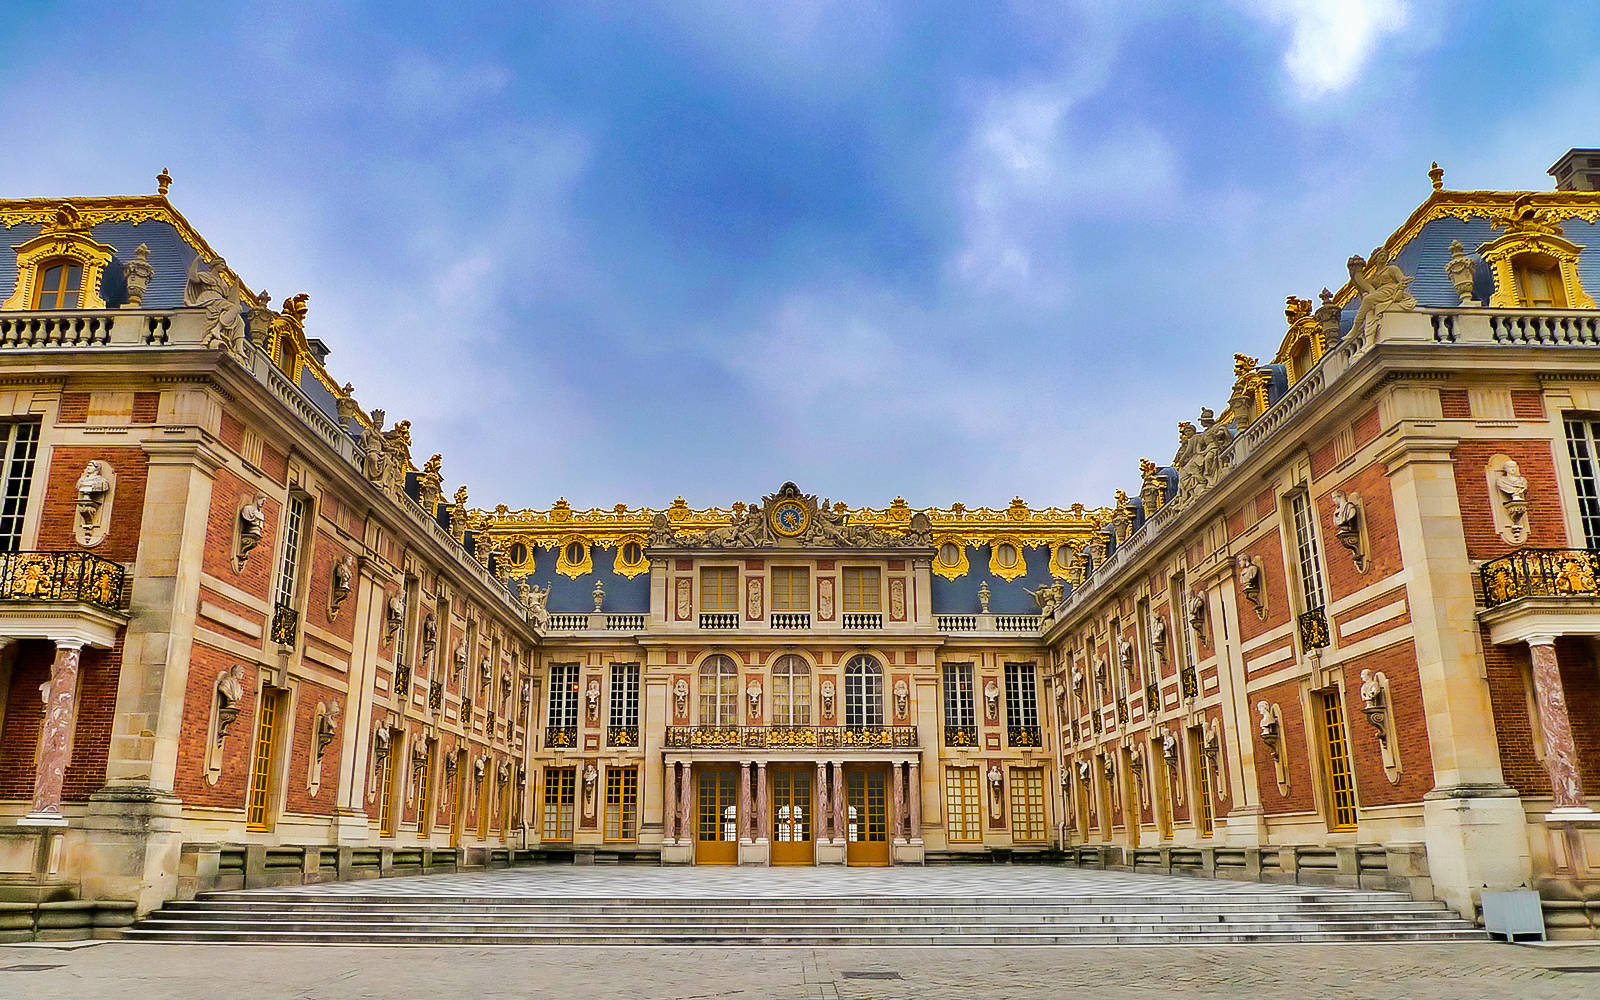 The Facade Of The Palace Of Versailles